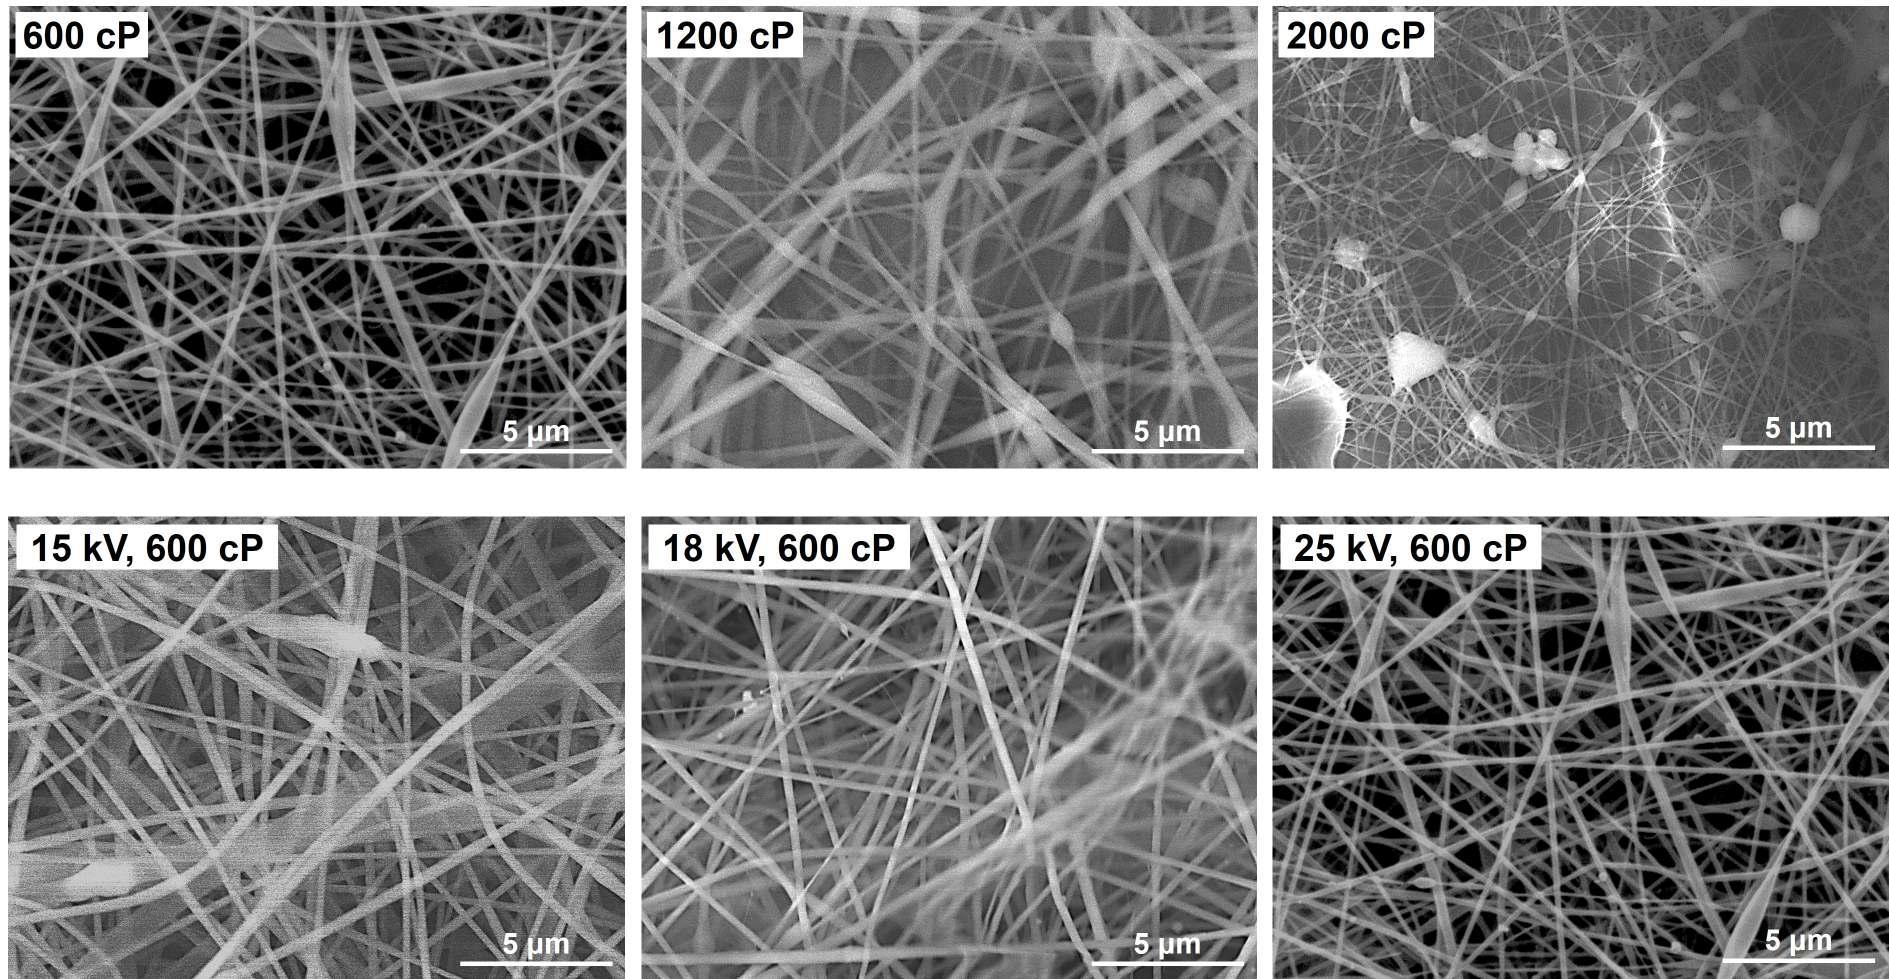 The morphology change of starch/PVA fiber felt according to viscosity and applied voltage.